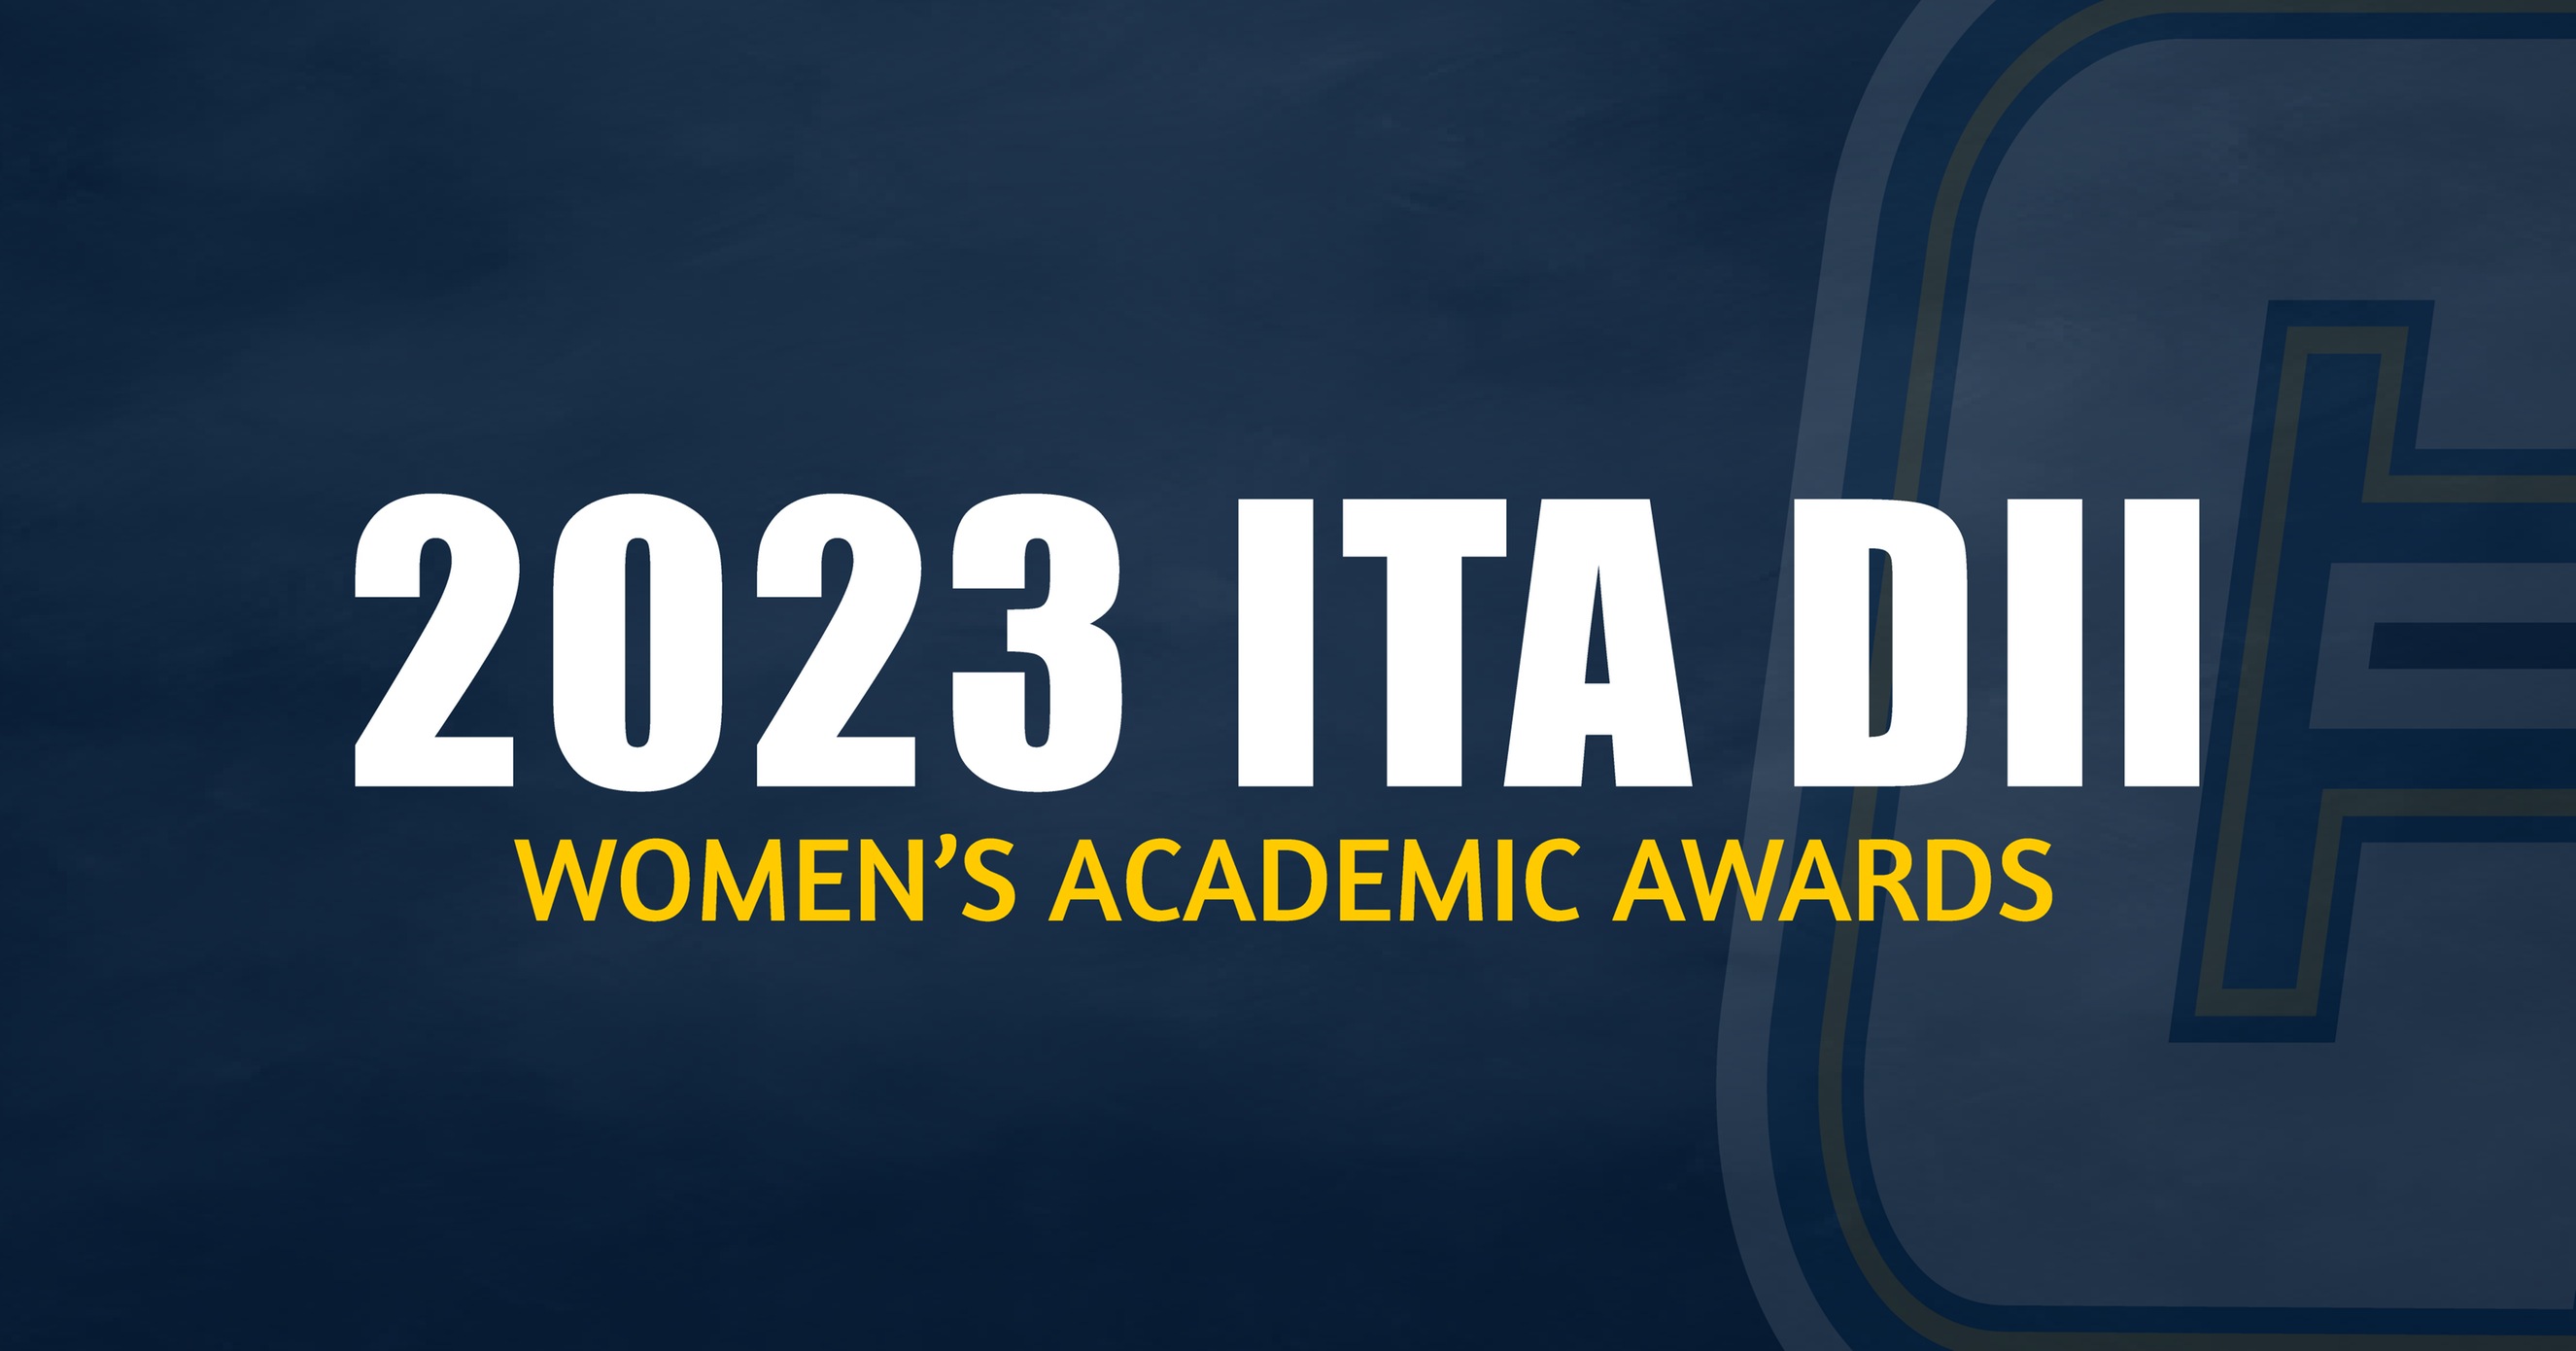 Eight Coker Athletes Named to the ITA Division II Women’s Academic Awards